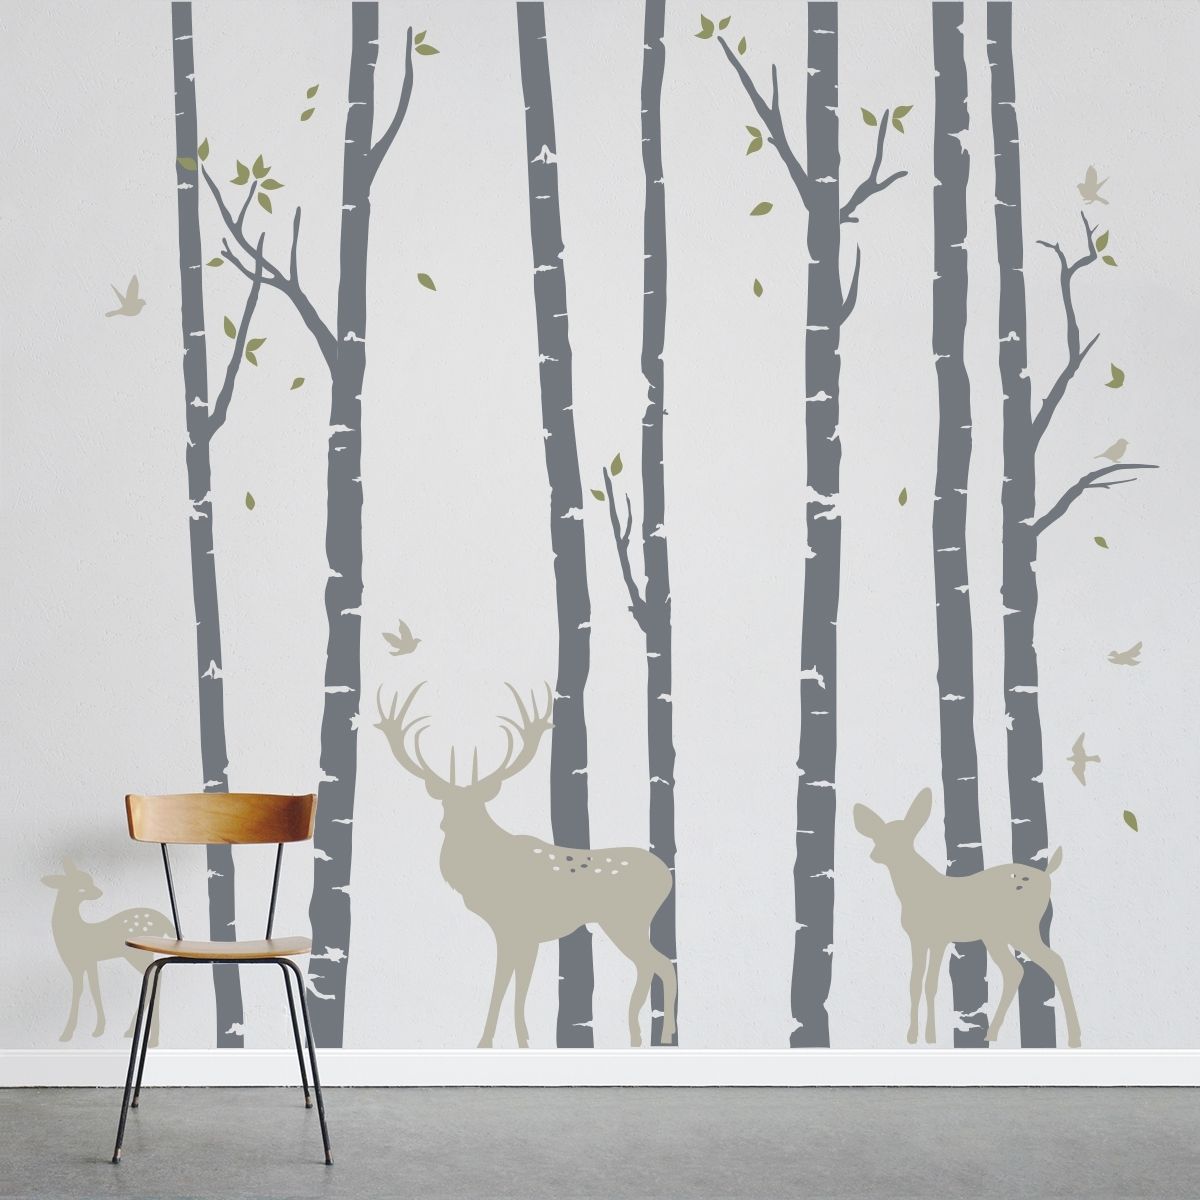 Birch Trees Forest With Elegant Birch Tree Wall Decal – Wall Inside Birch Tree Wall Art (View 11 of 20)